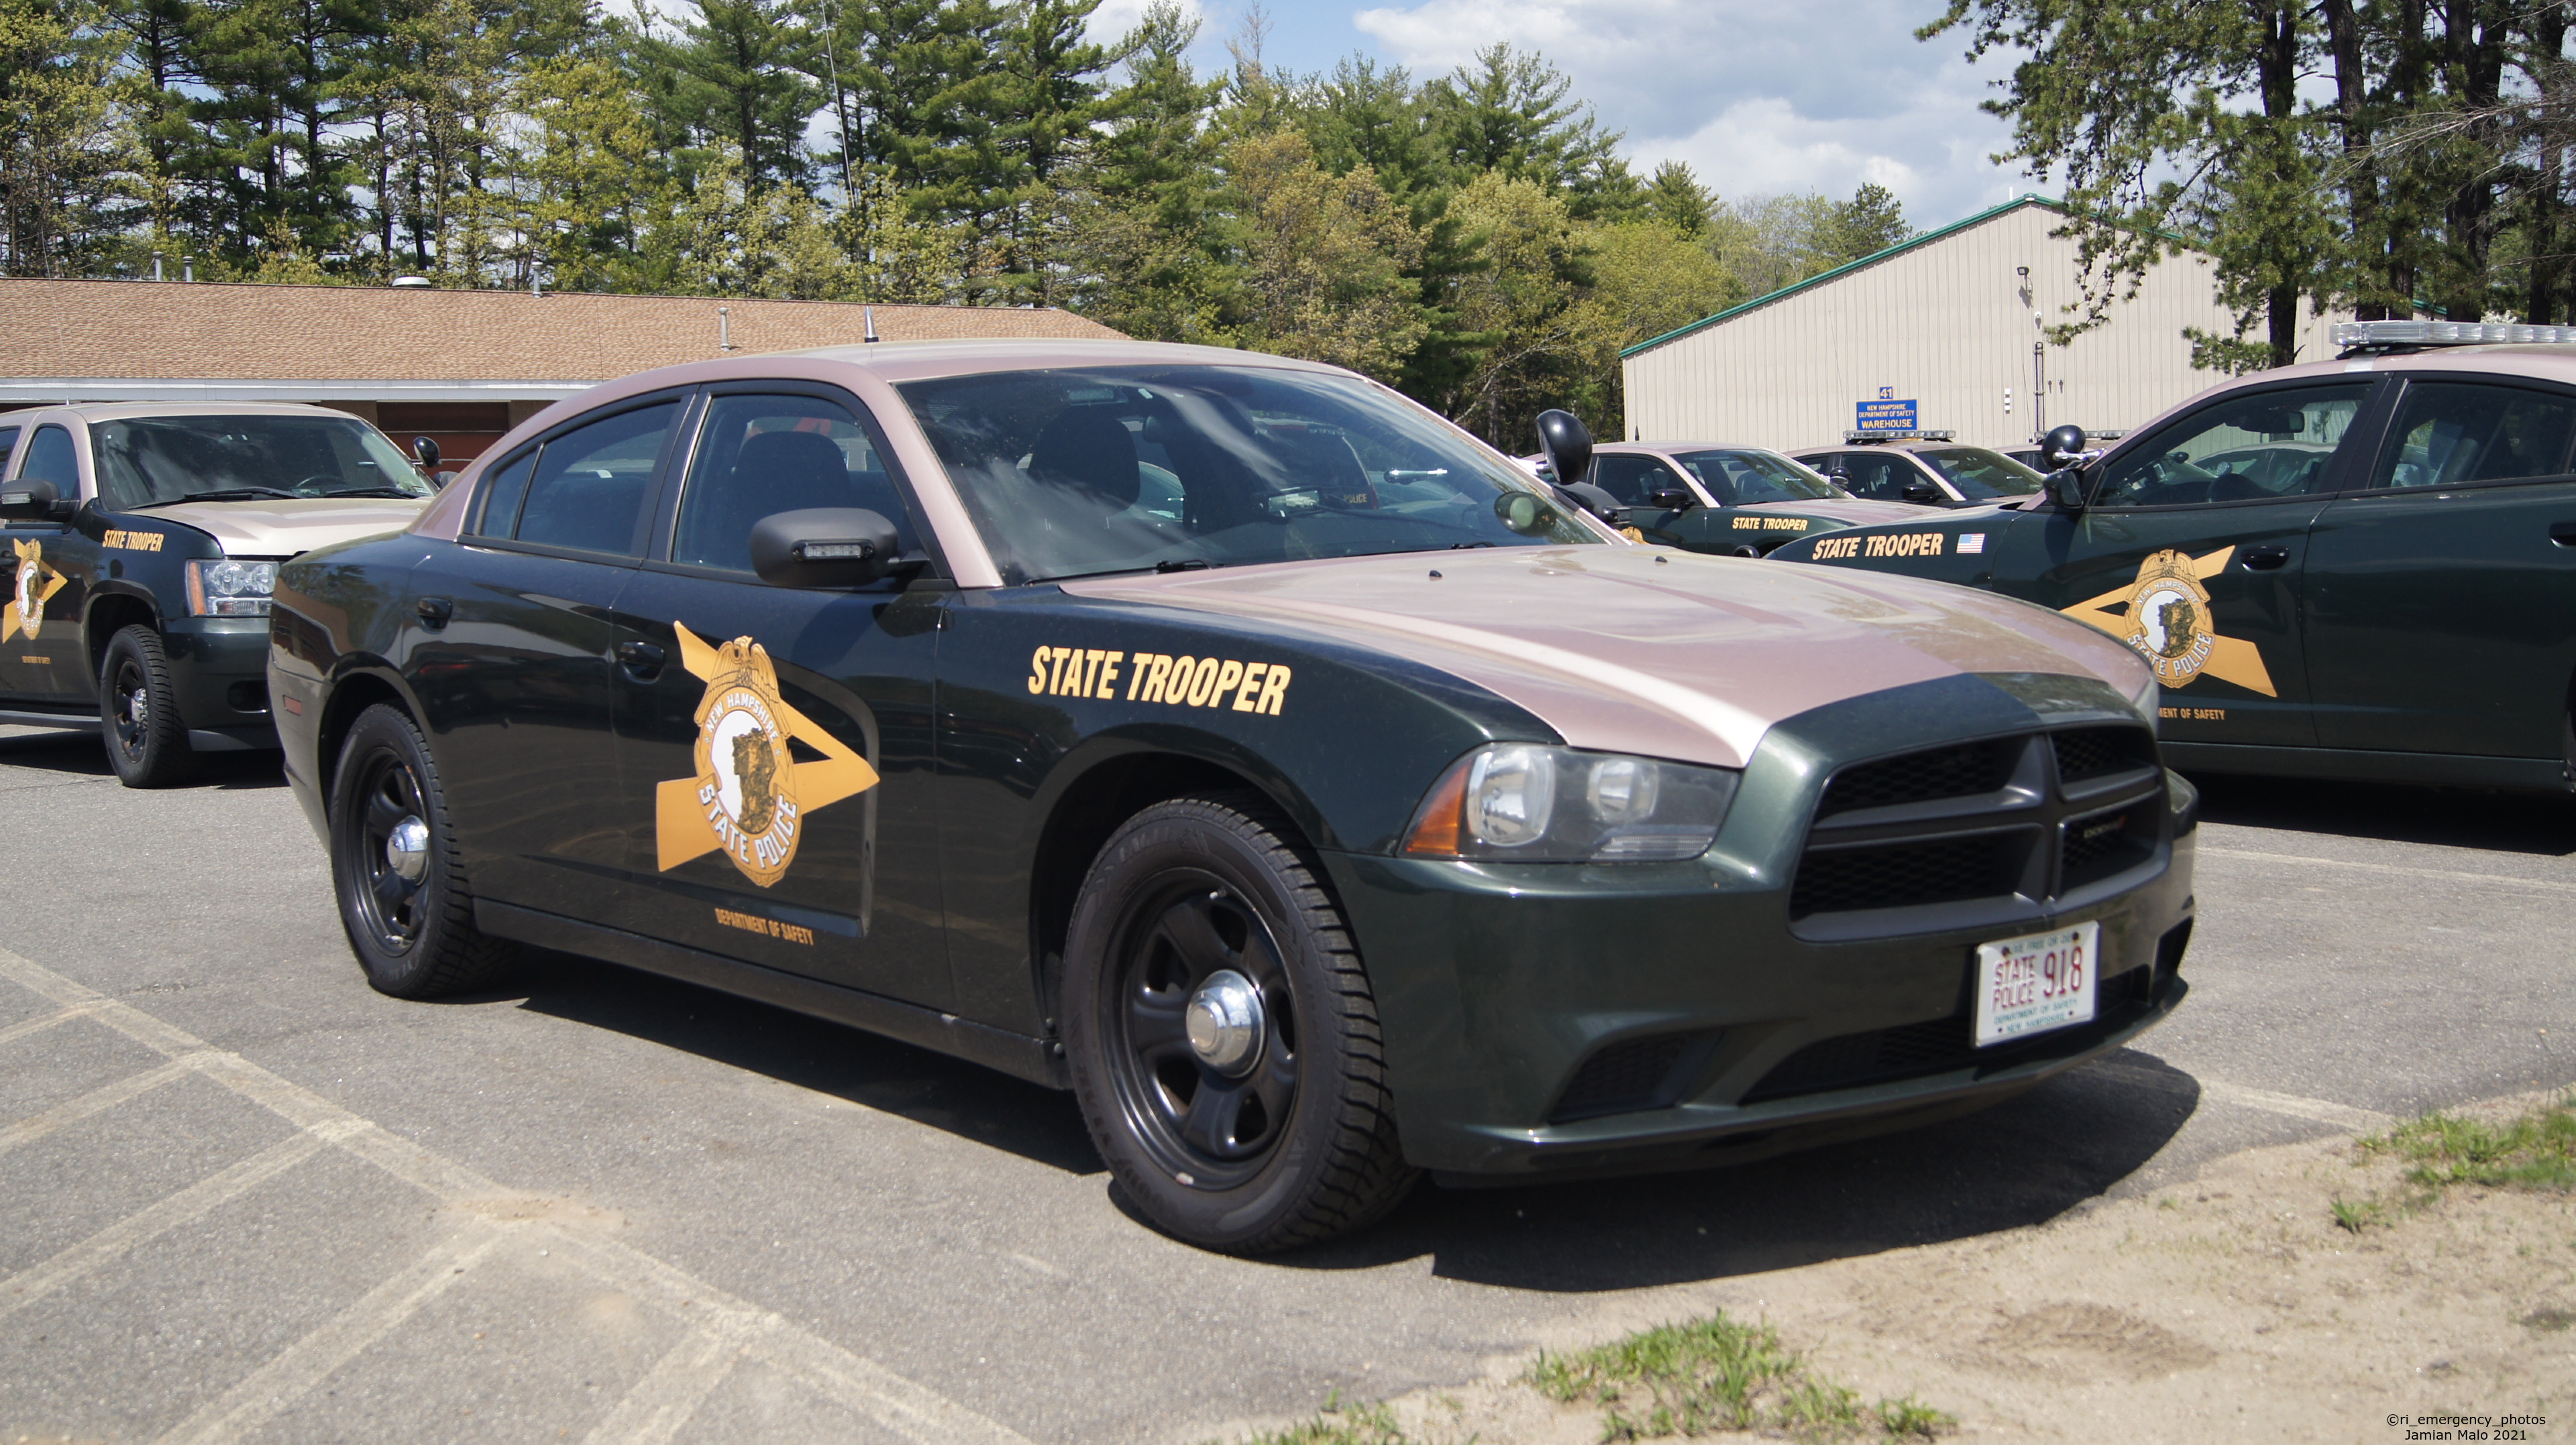 A photo  of New Hampshire State Police
            Cruiser 918, a 2011-2014 Dodge Charger             taken by Jamian Malo